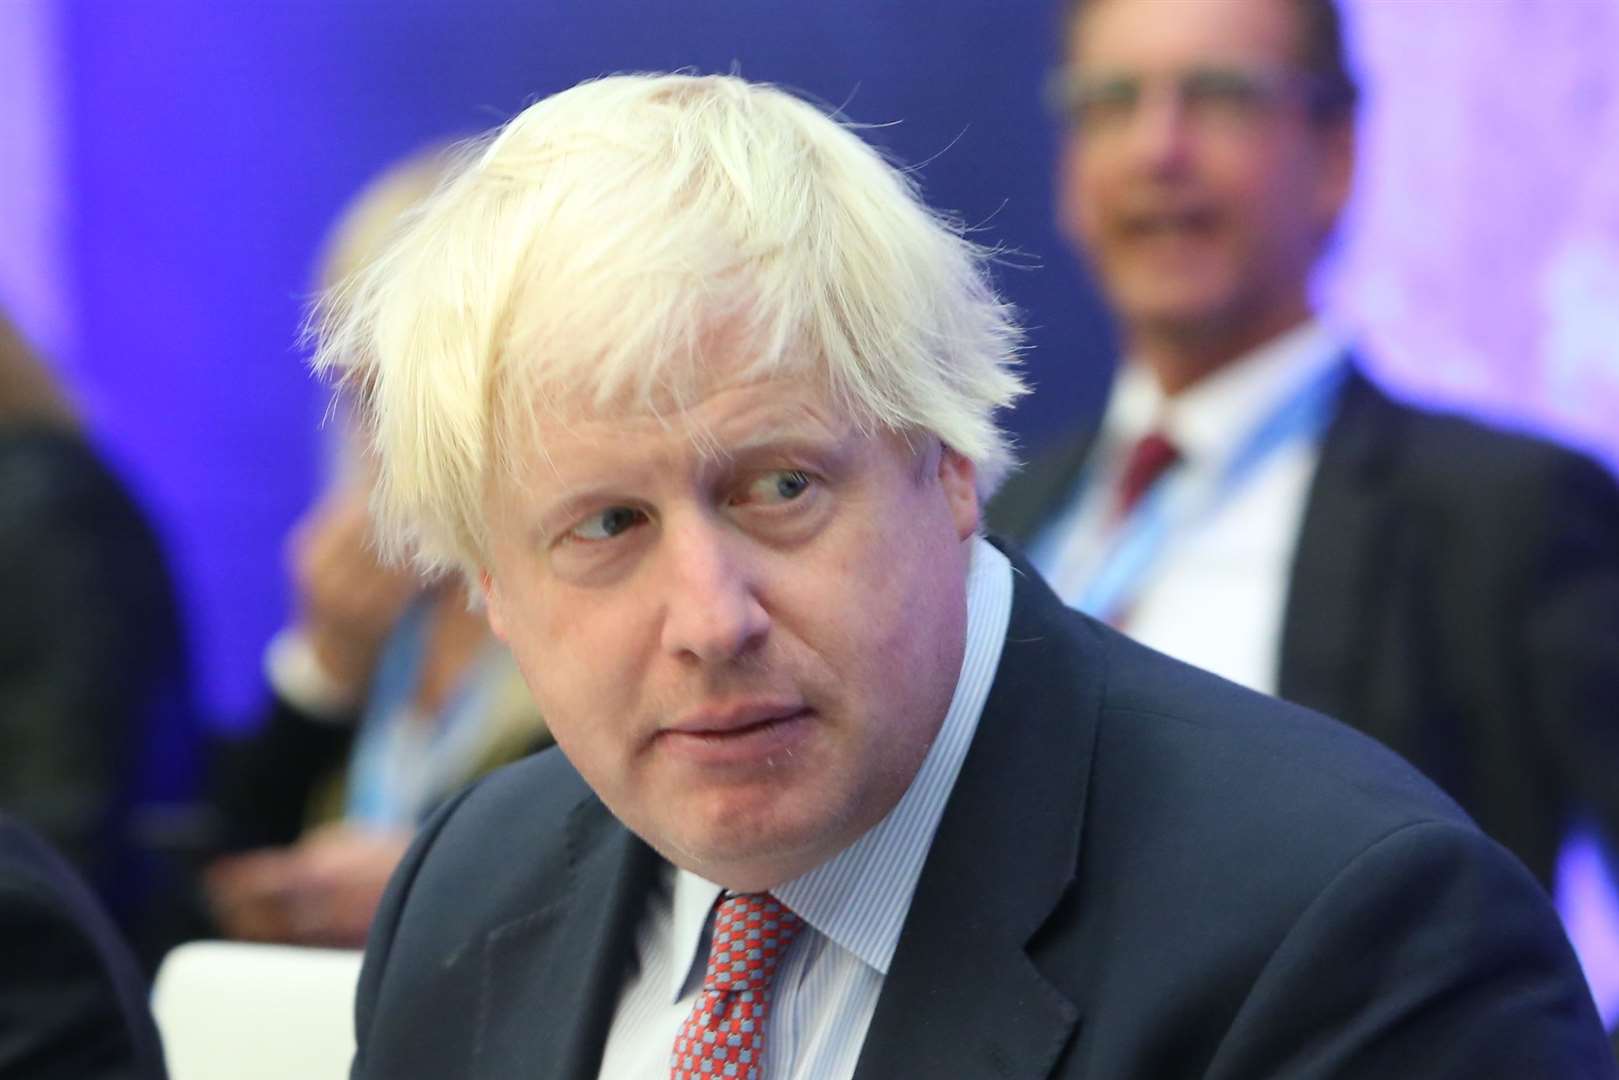 Boris Johnson is among those responsible for hosting COP26